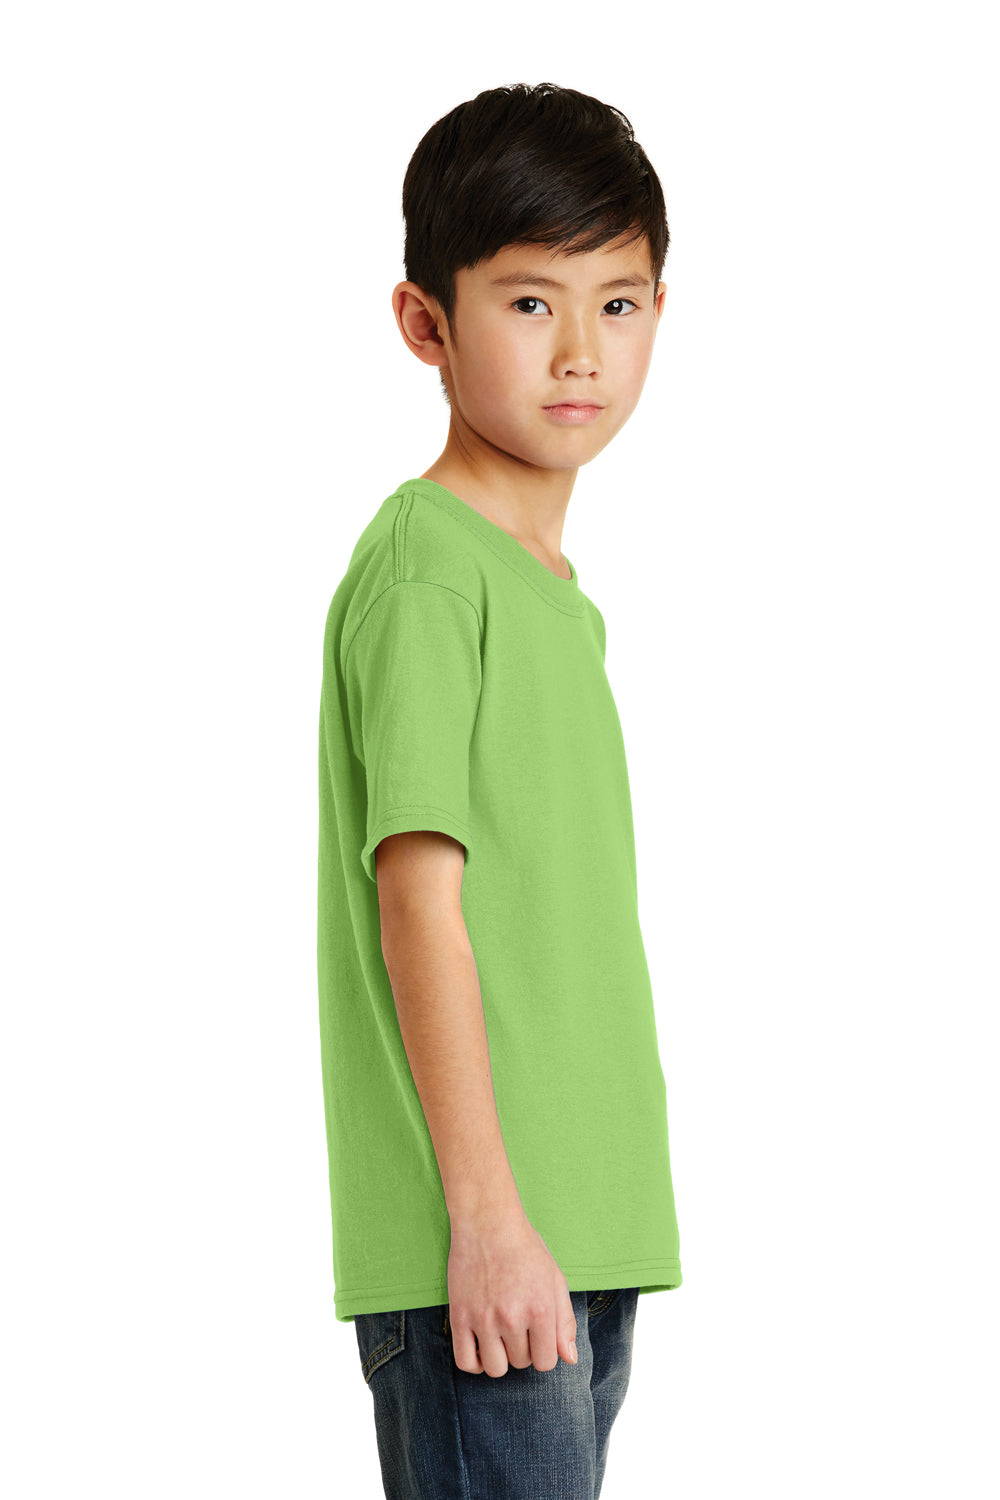 Port & Company PC55Y Youth Core Short Sleeve Crewneck T-Shirt Lime Green Side